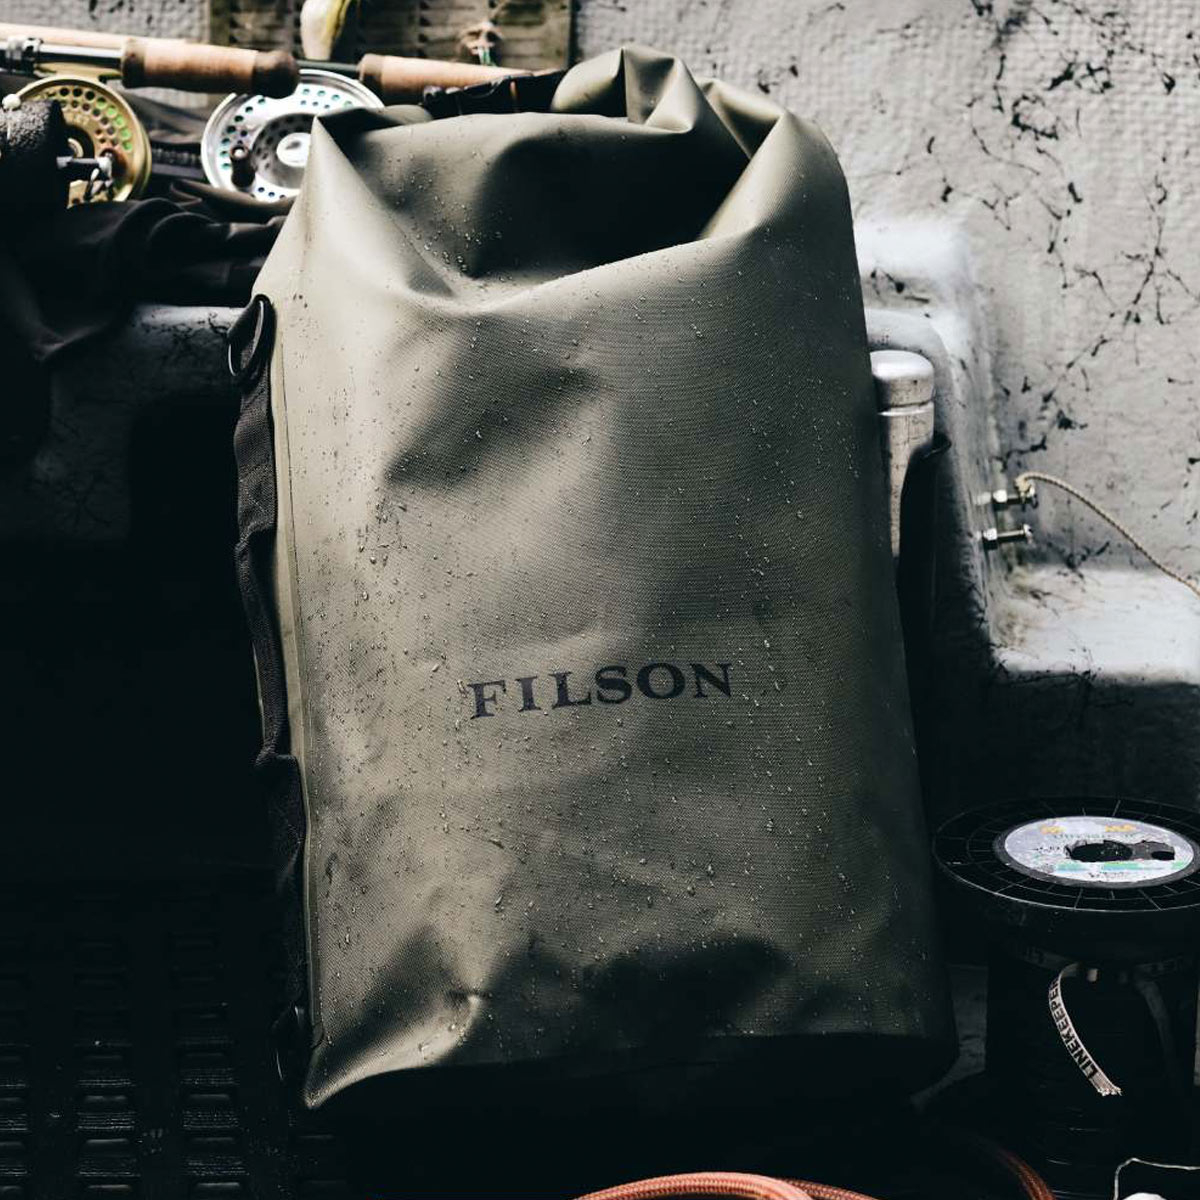 Filson Dry Bag Large, waterproof and lightweight